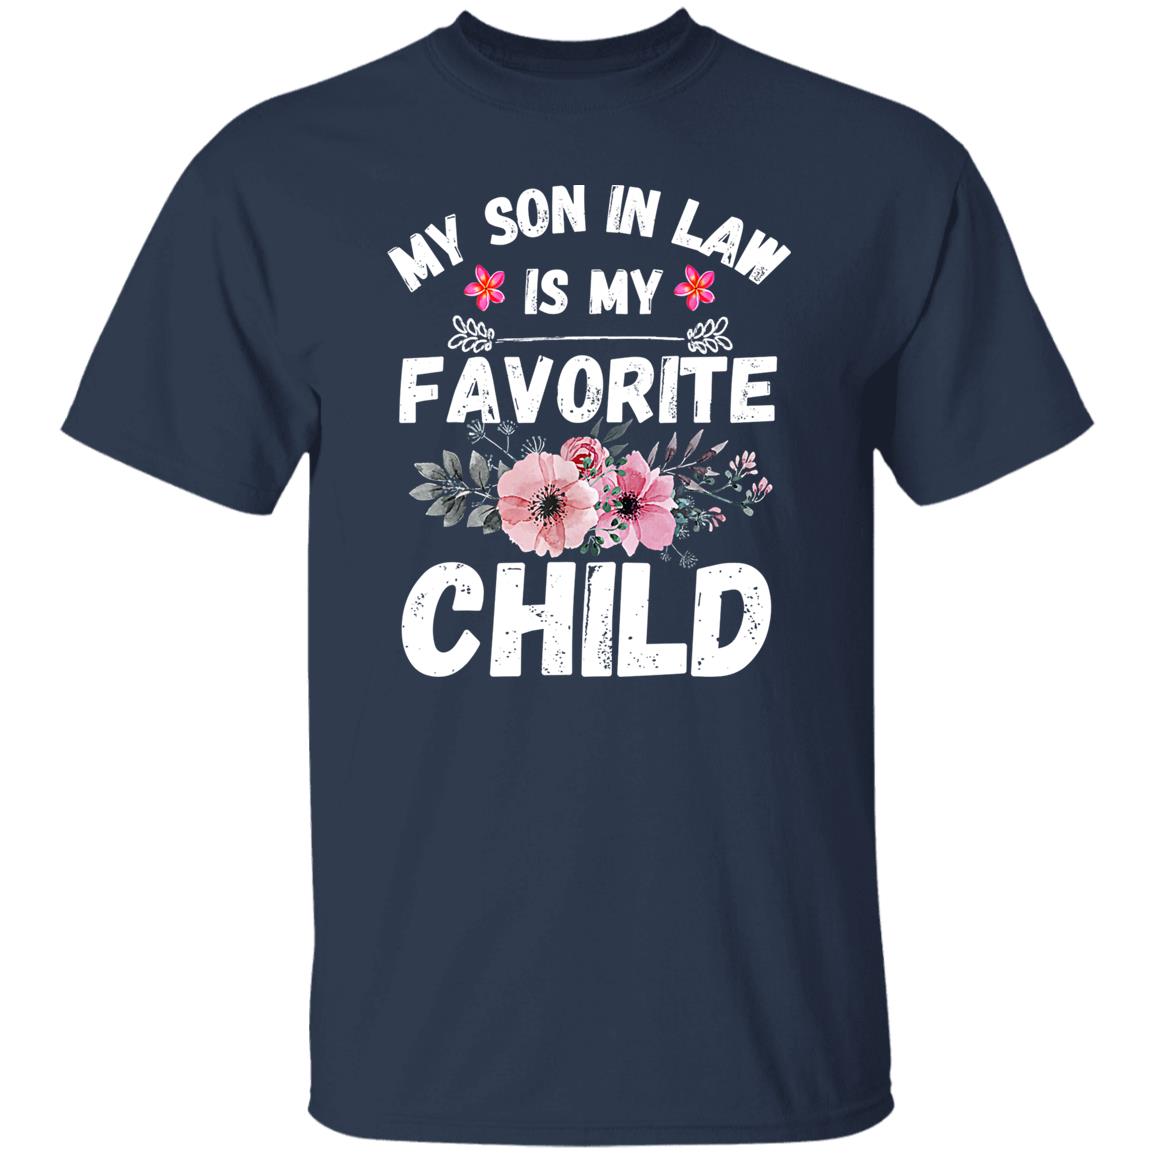 My Son-In-Law Is My Favorite Child Funny Mom Shirt